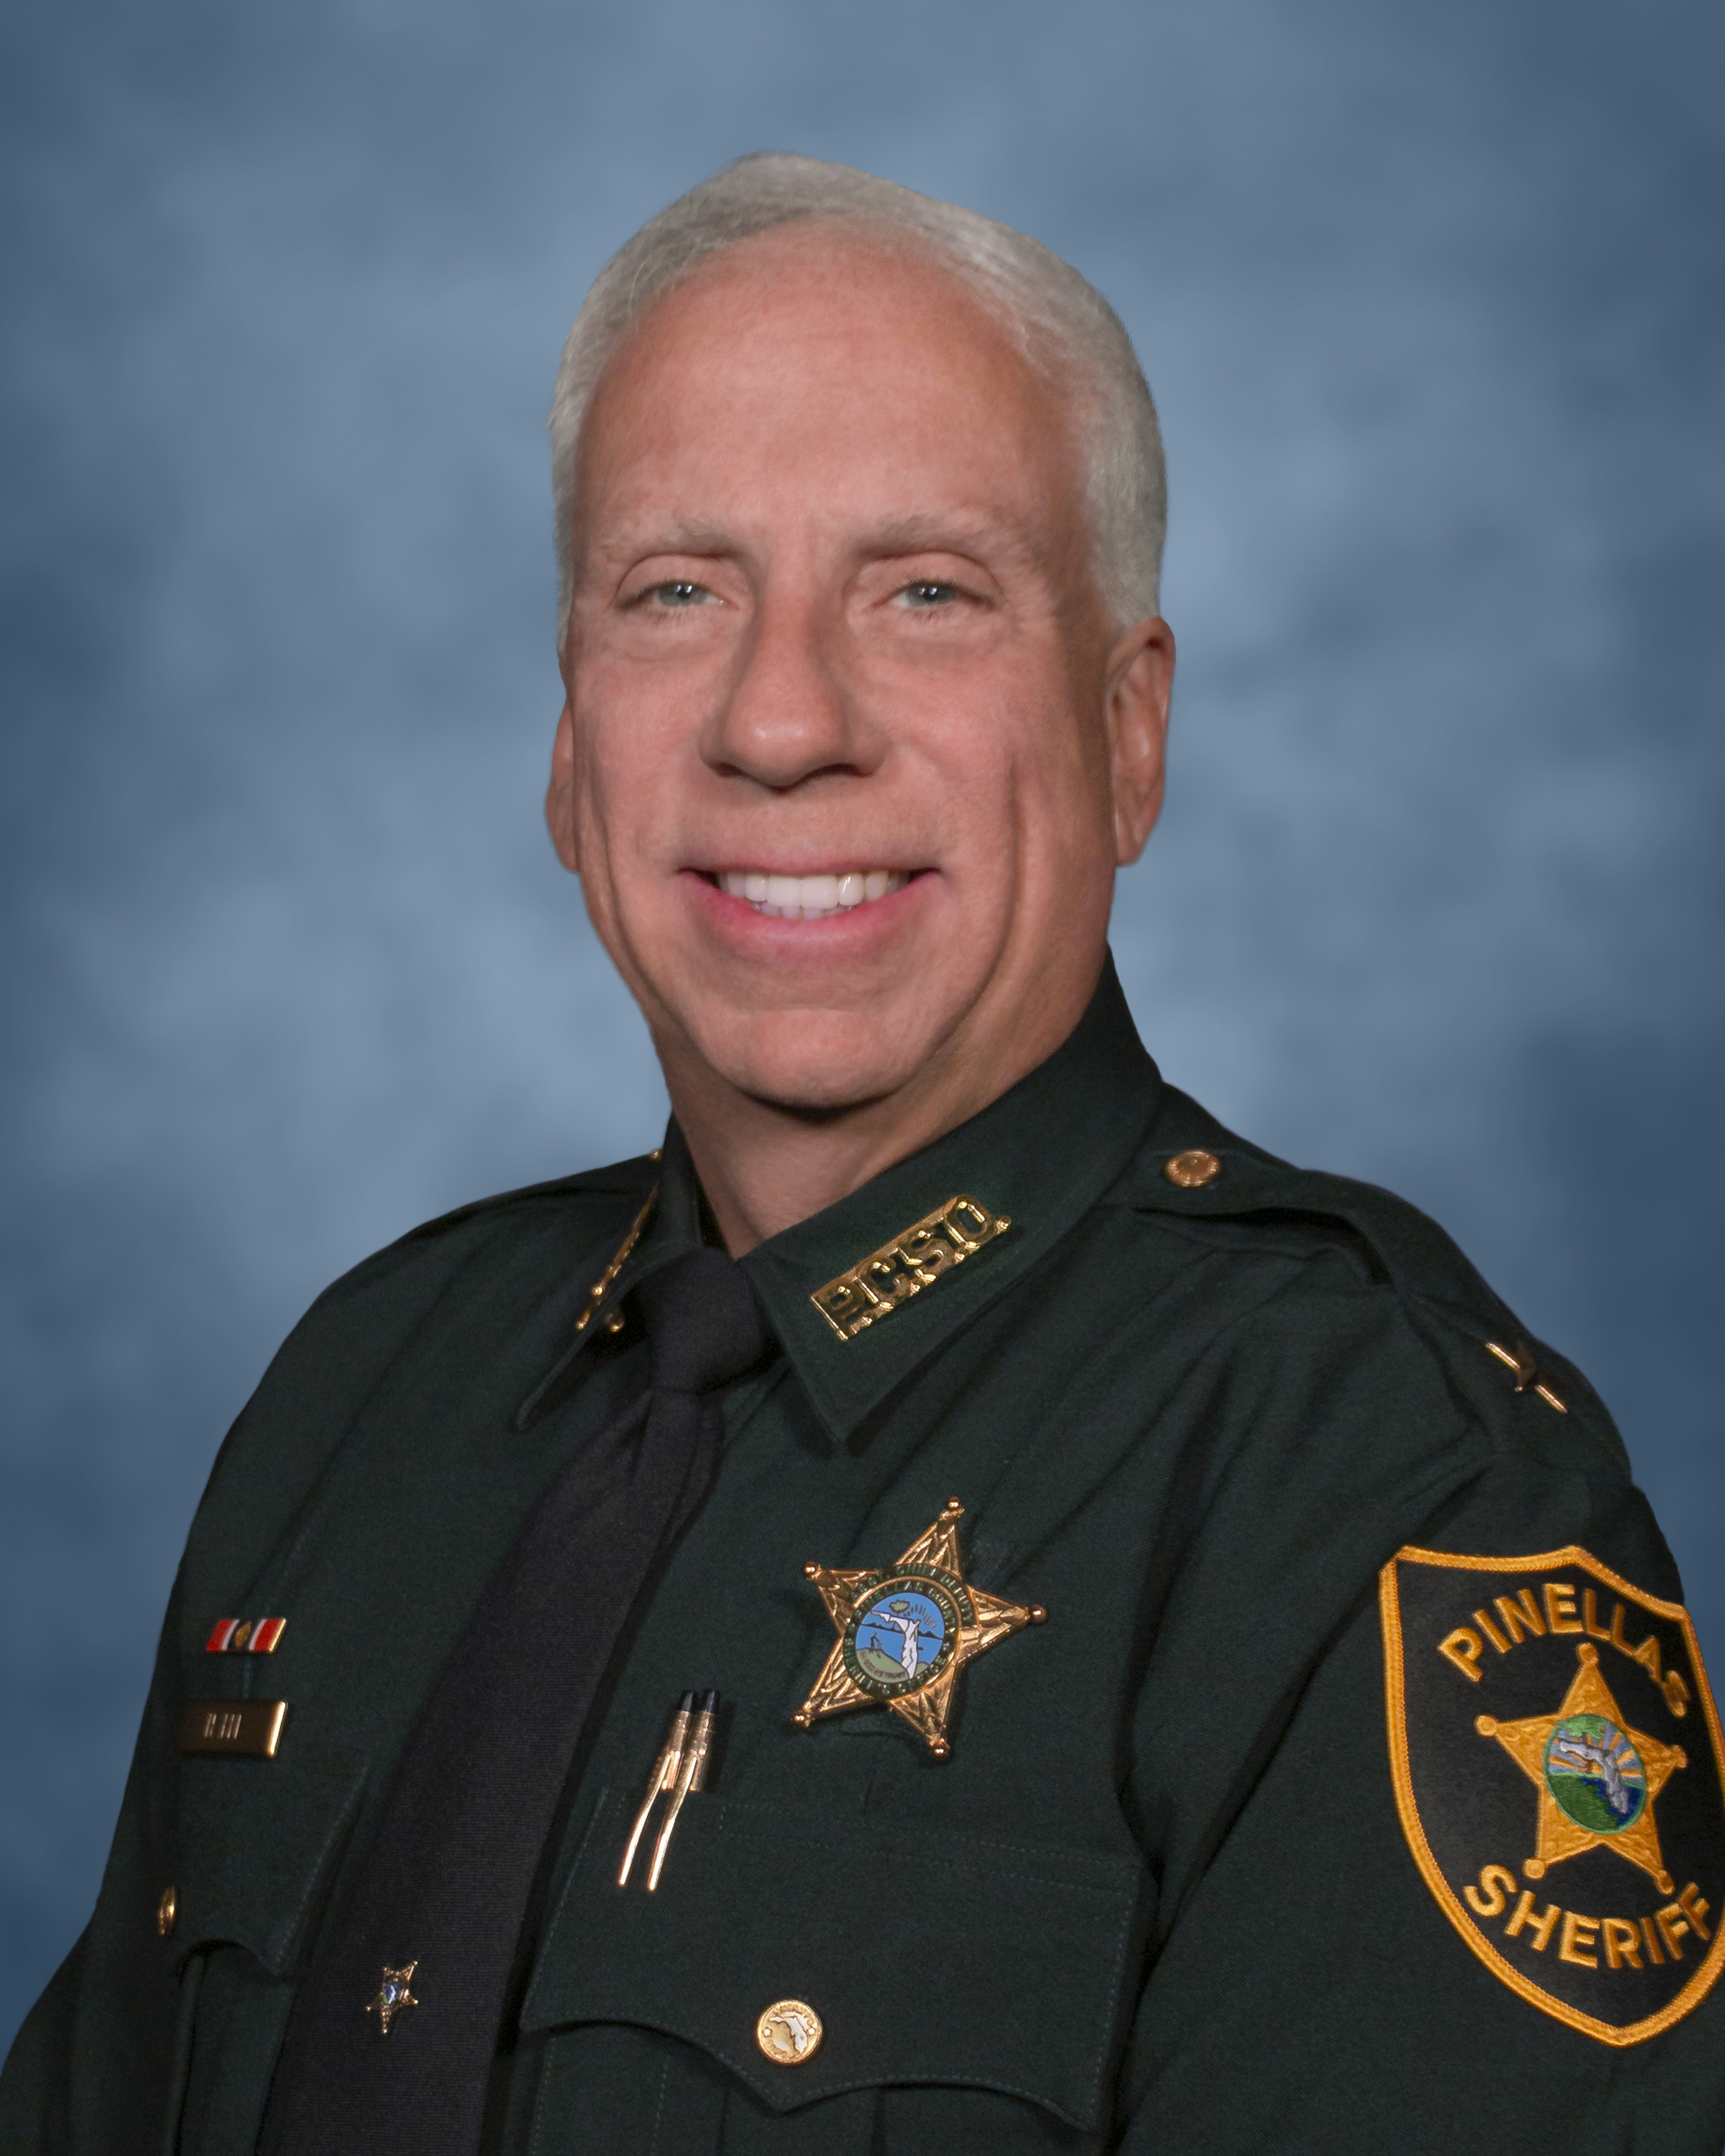 Assistant Chief Deputy Paul Halle